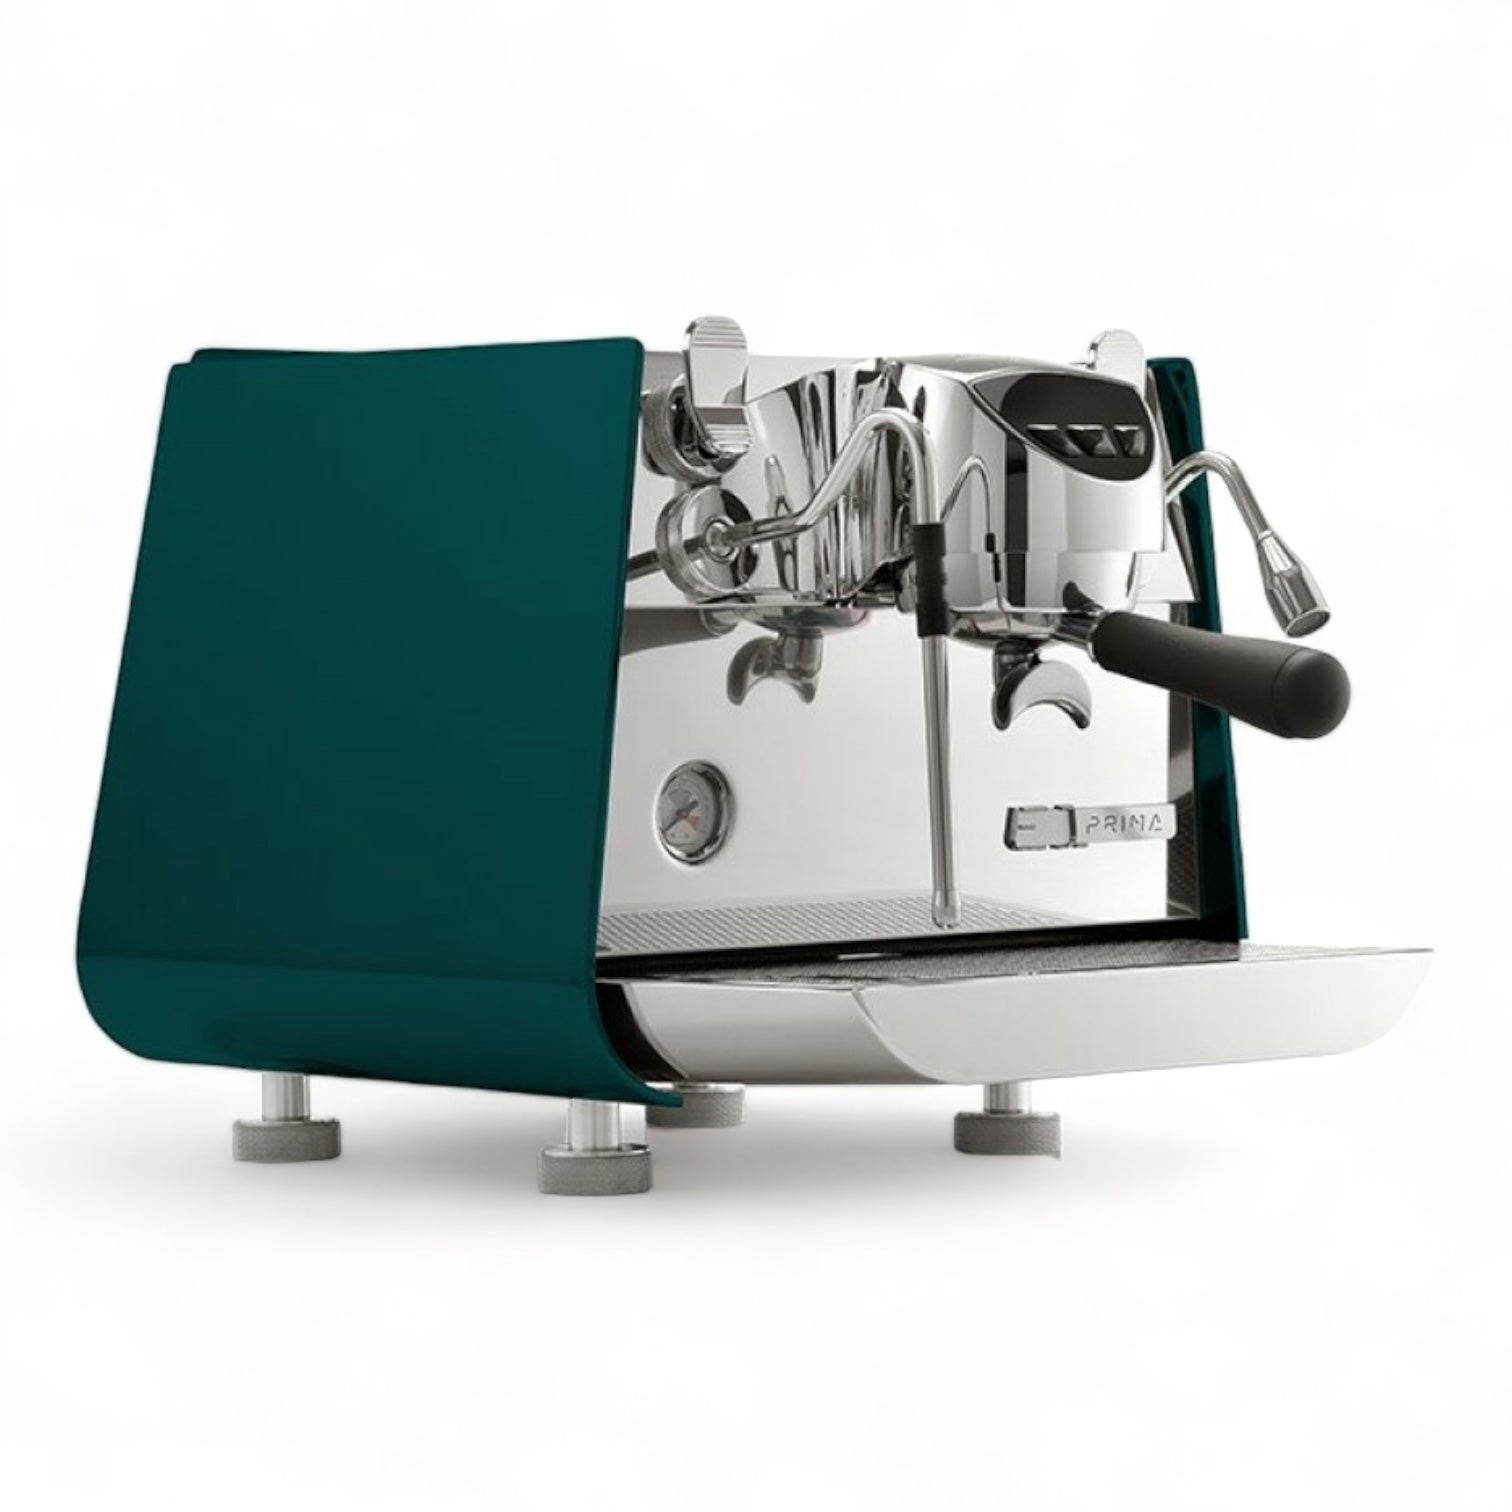 Eagle One Prima by Victoria Arduino at Ue Coffee Roasters